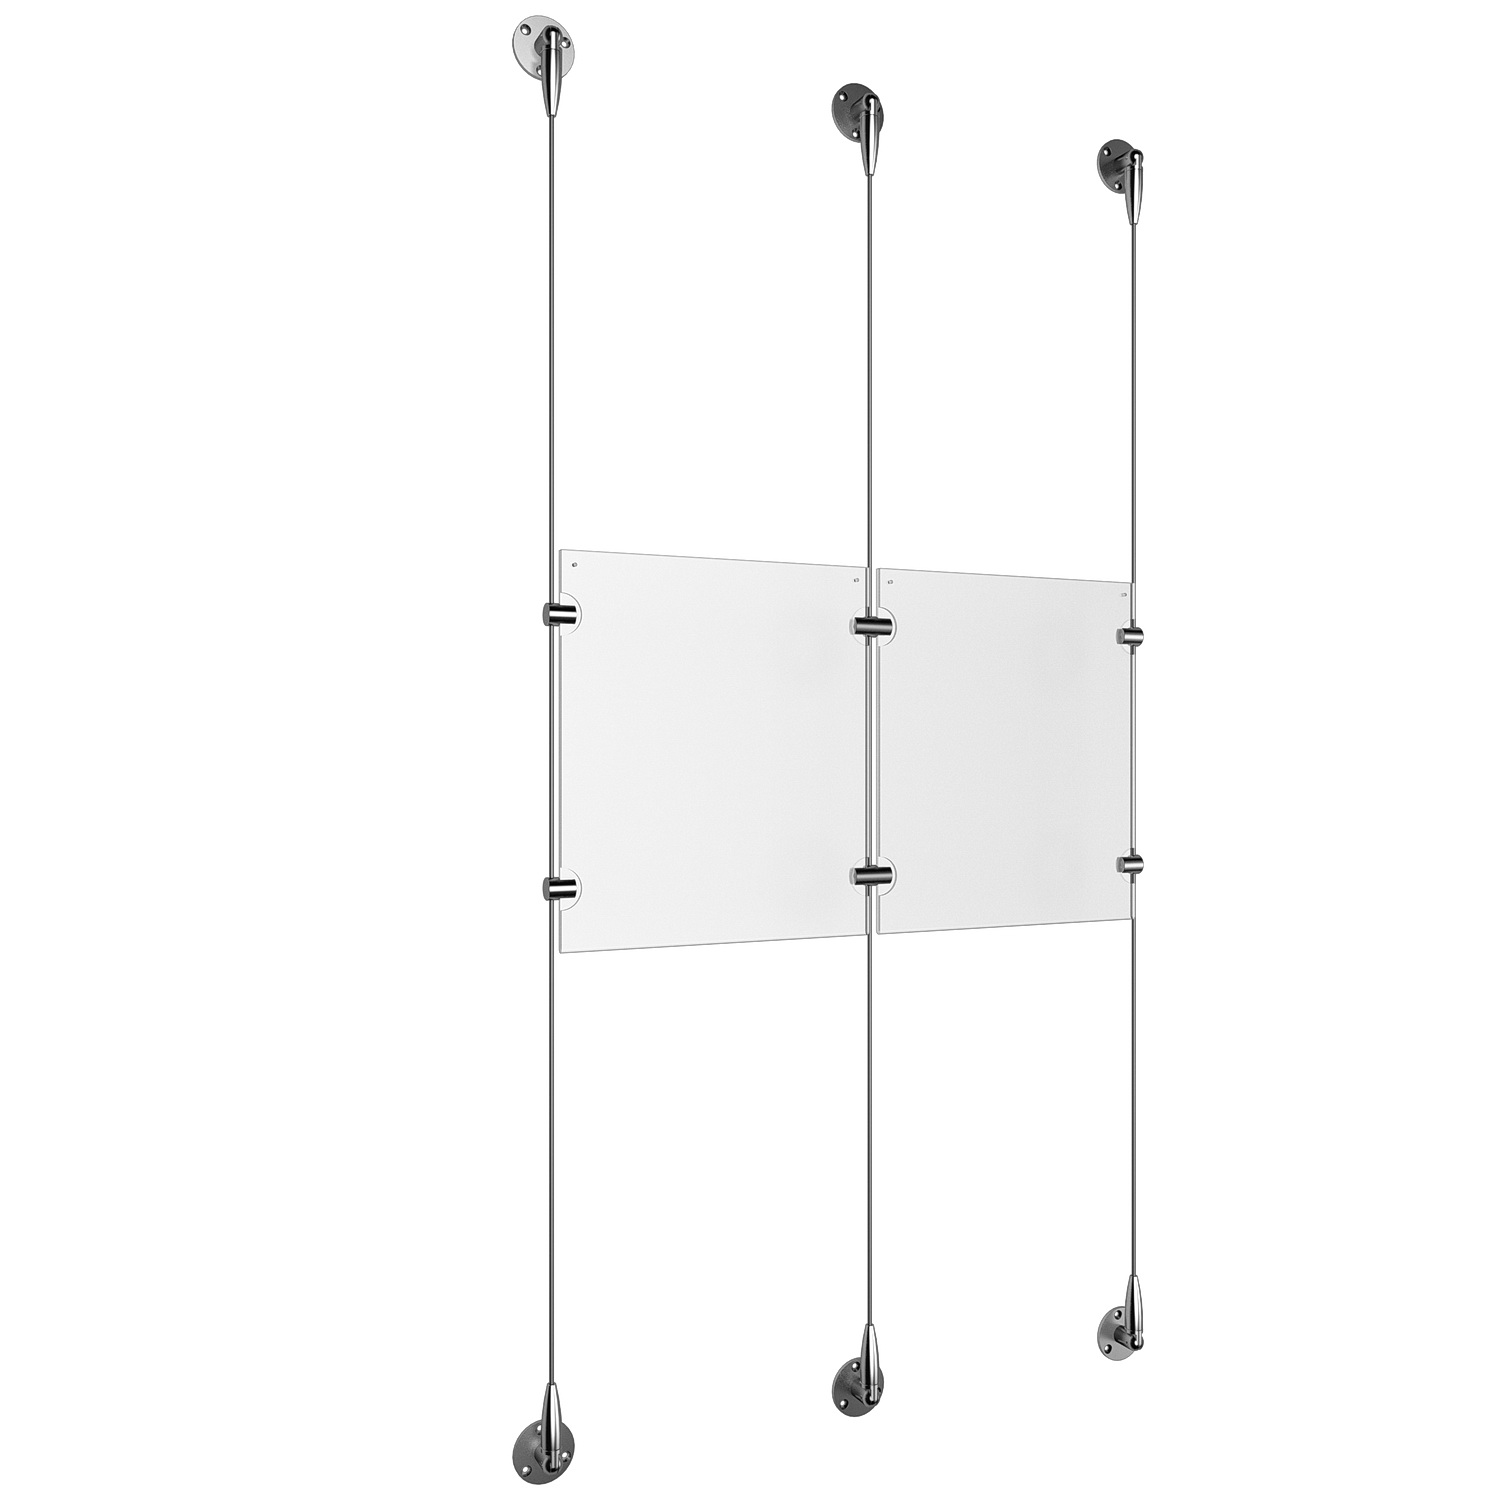 (2) 8-1/2'' Width x 11'' Height Clear Acrylic Frame & (3) Stainless Steel Satin Brushed Adjustable Angle Signature 1/8'' Cable Systems with (4) Single-Sided Panel Grippers (2) Double-Sided Panel Grippers